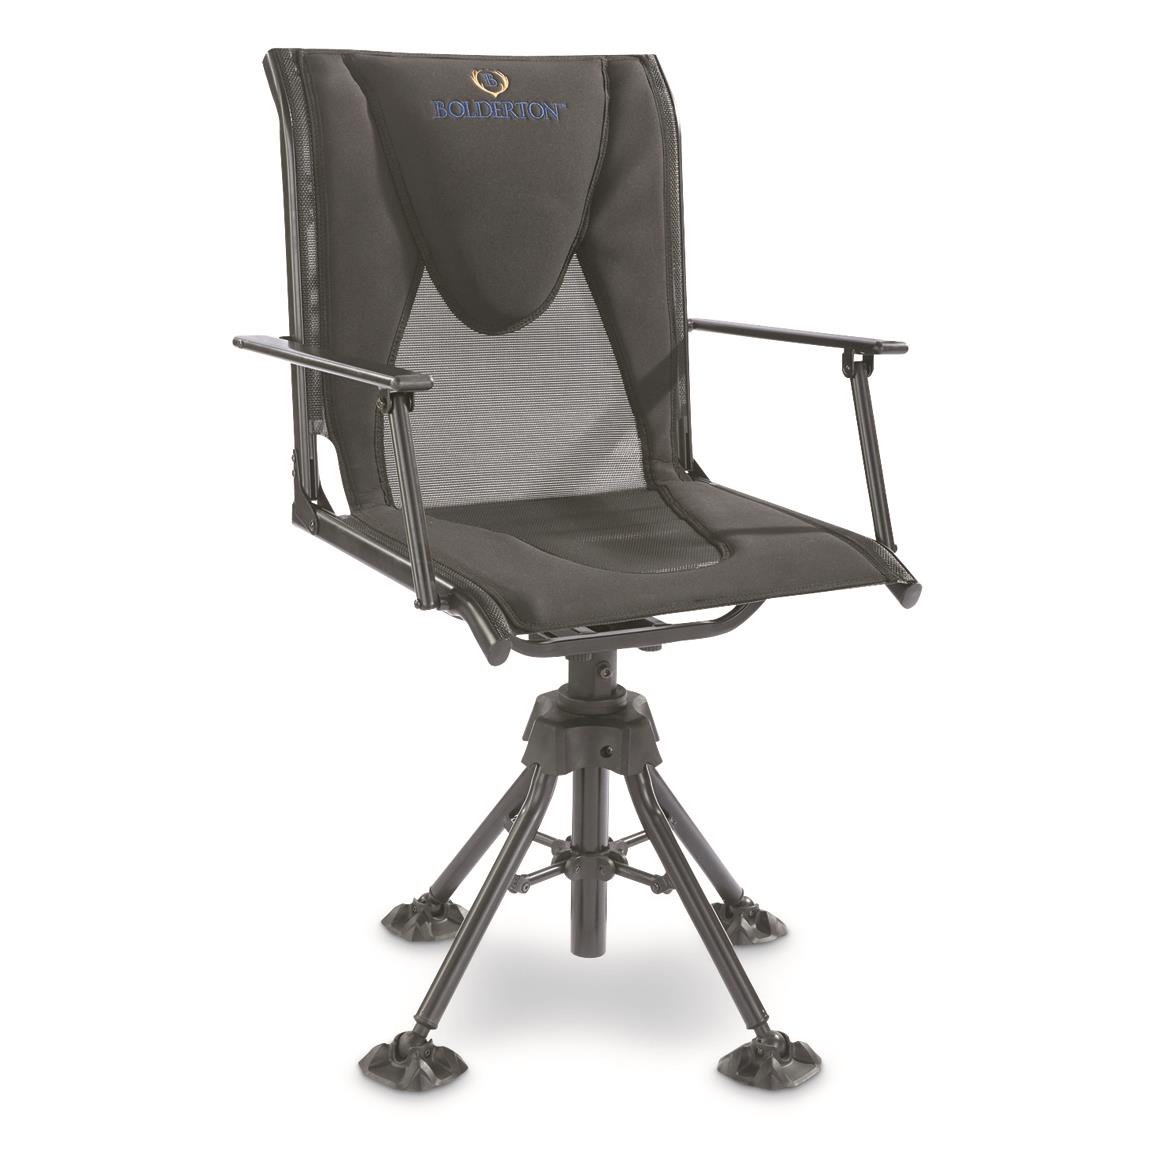 Bolderton 360 Comfort Swivel Hunting Blind Chair with Armrests